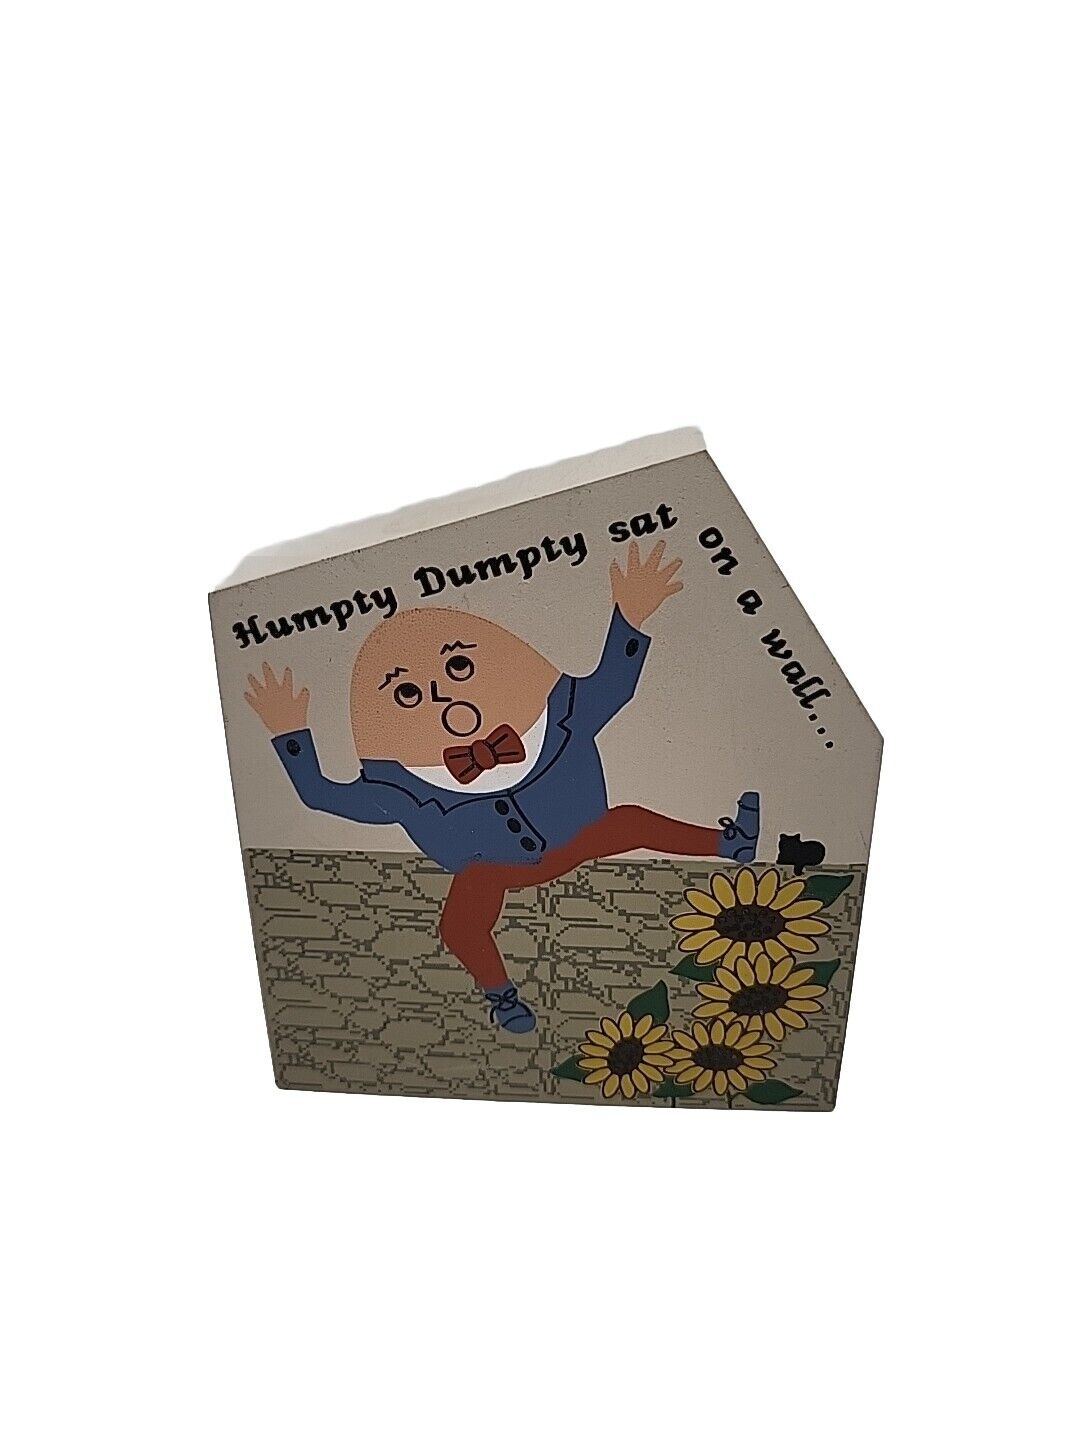 The Cat's Meow Nursery Rymes Humpty Dumpty 1995 Signed Jaline 96